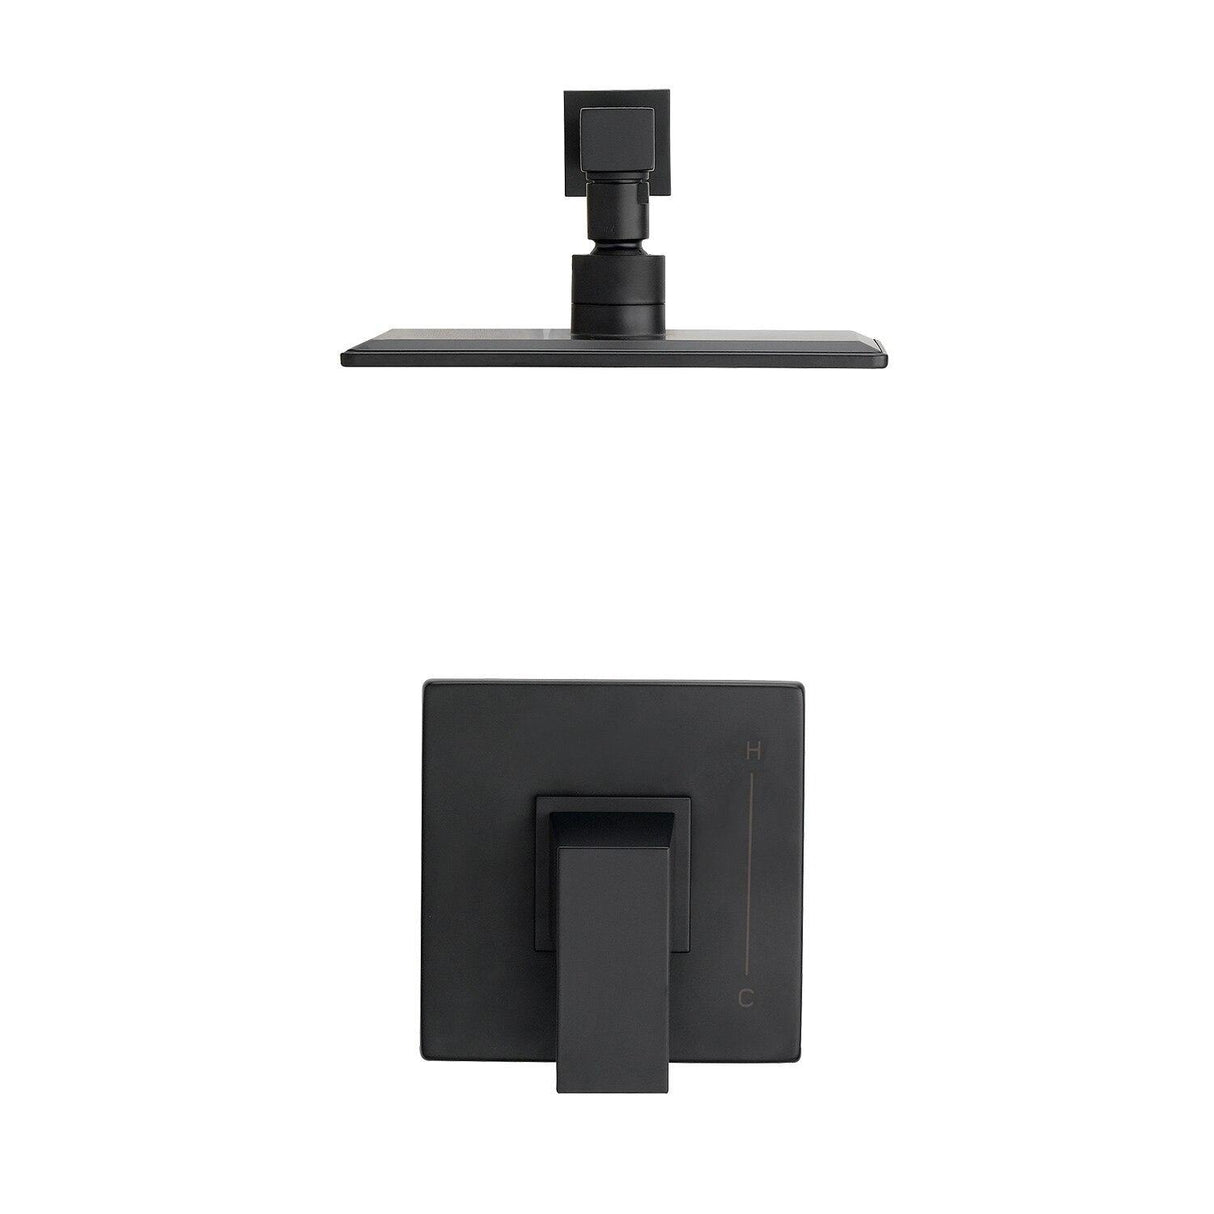 Gerber D501562BSTC Satin Black Mid-town Shower-only Trim Kit, 1.75GPM